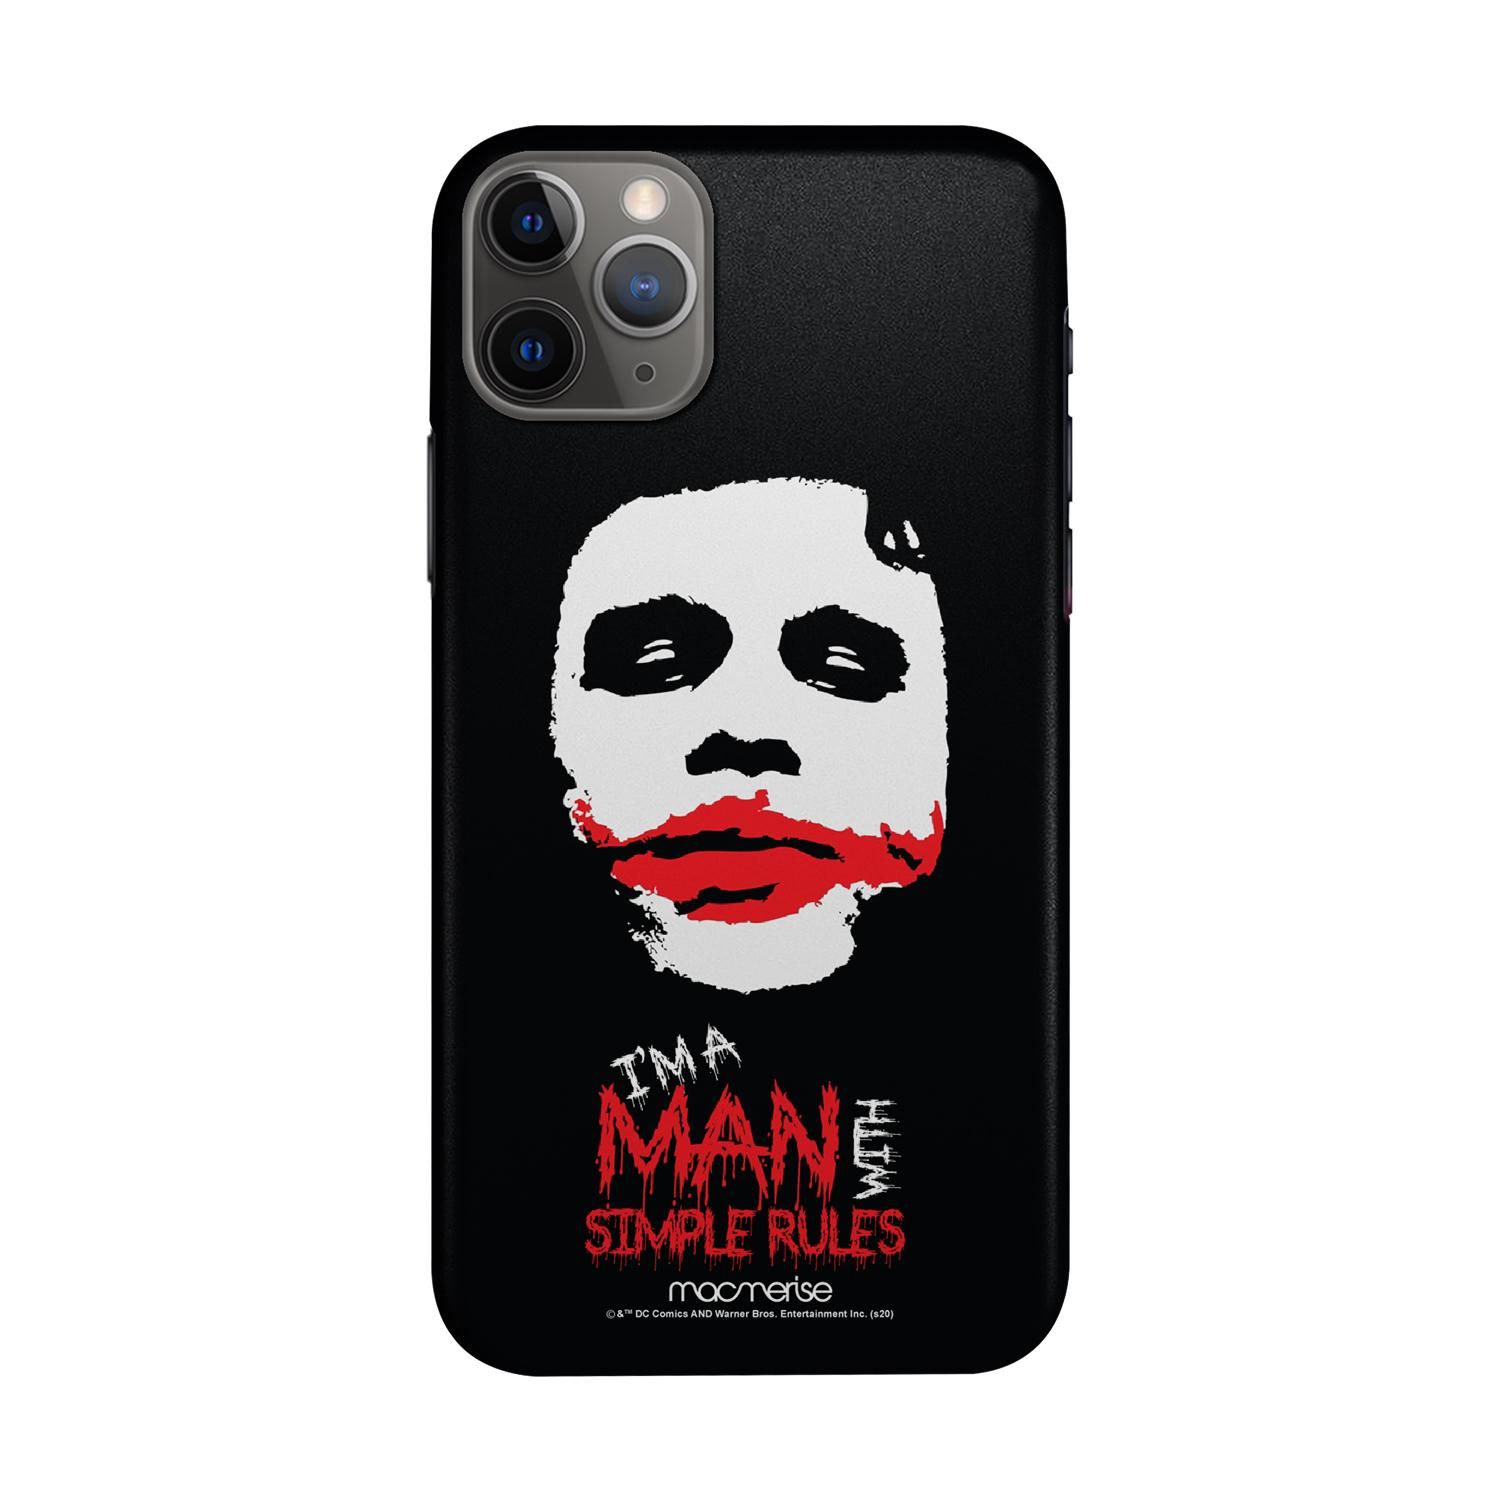 Buy Man With Simple Rules - Sleek Phone Case for iPhone 11 Pro Max Online